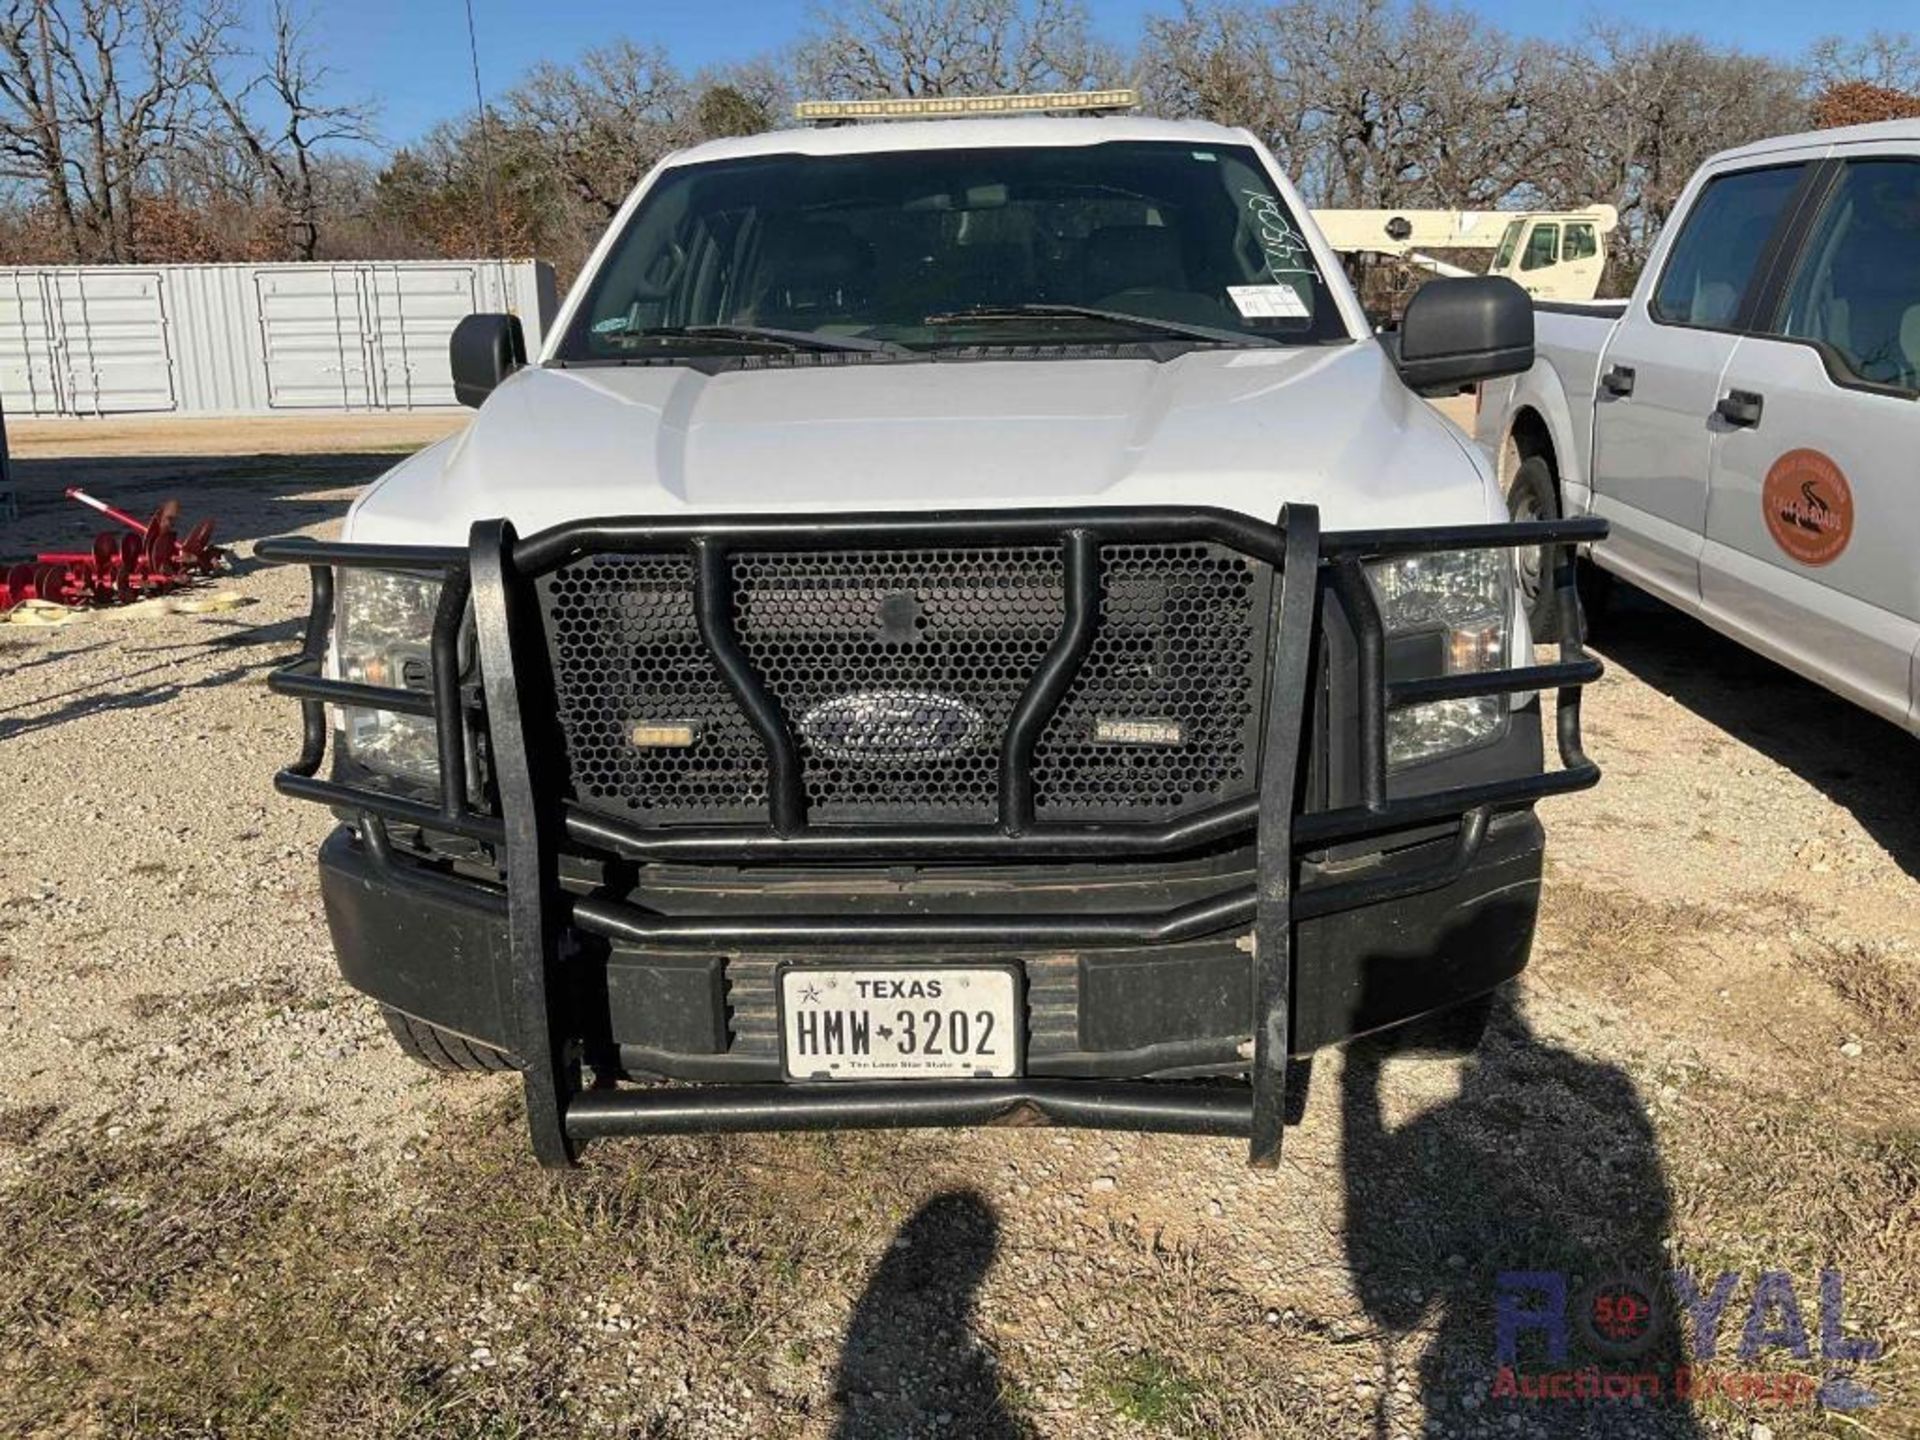 Ford F150 Crew Cab Pickup Truck - Image 7 of 18